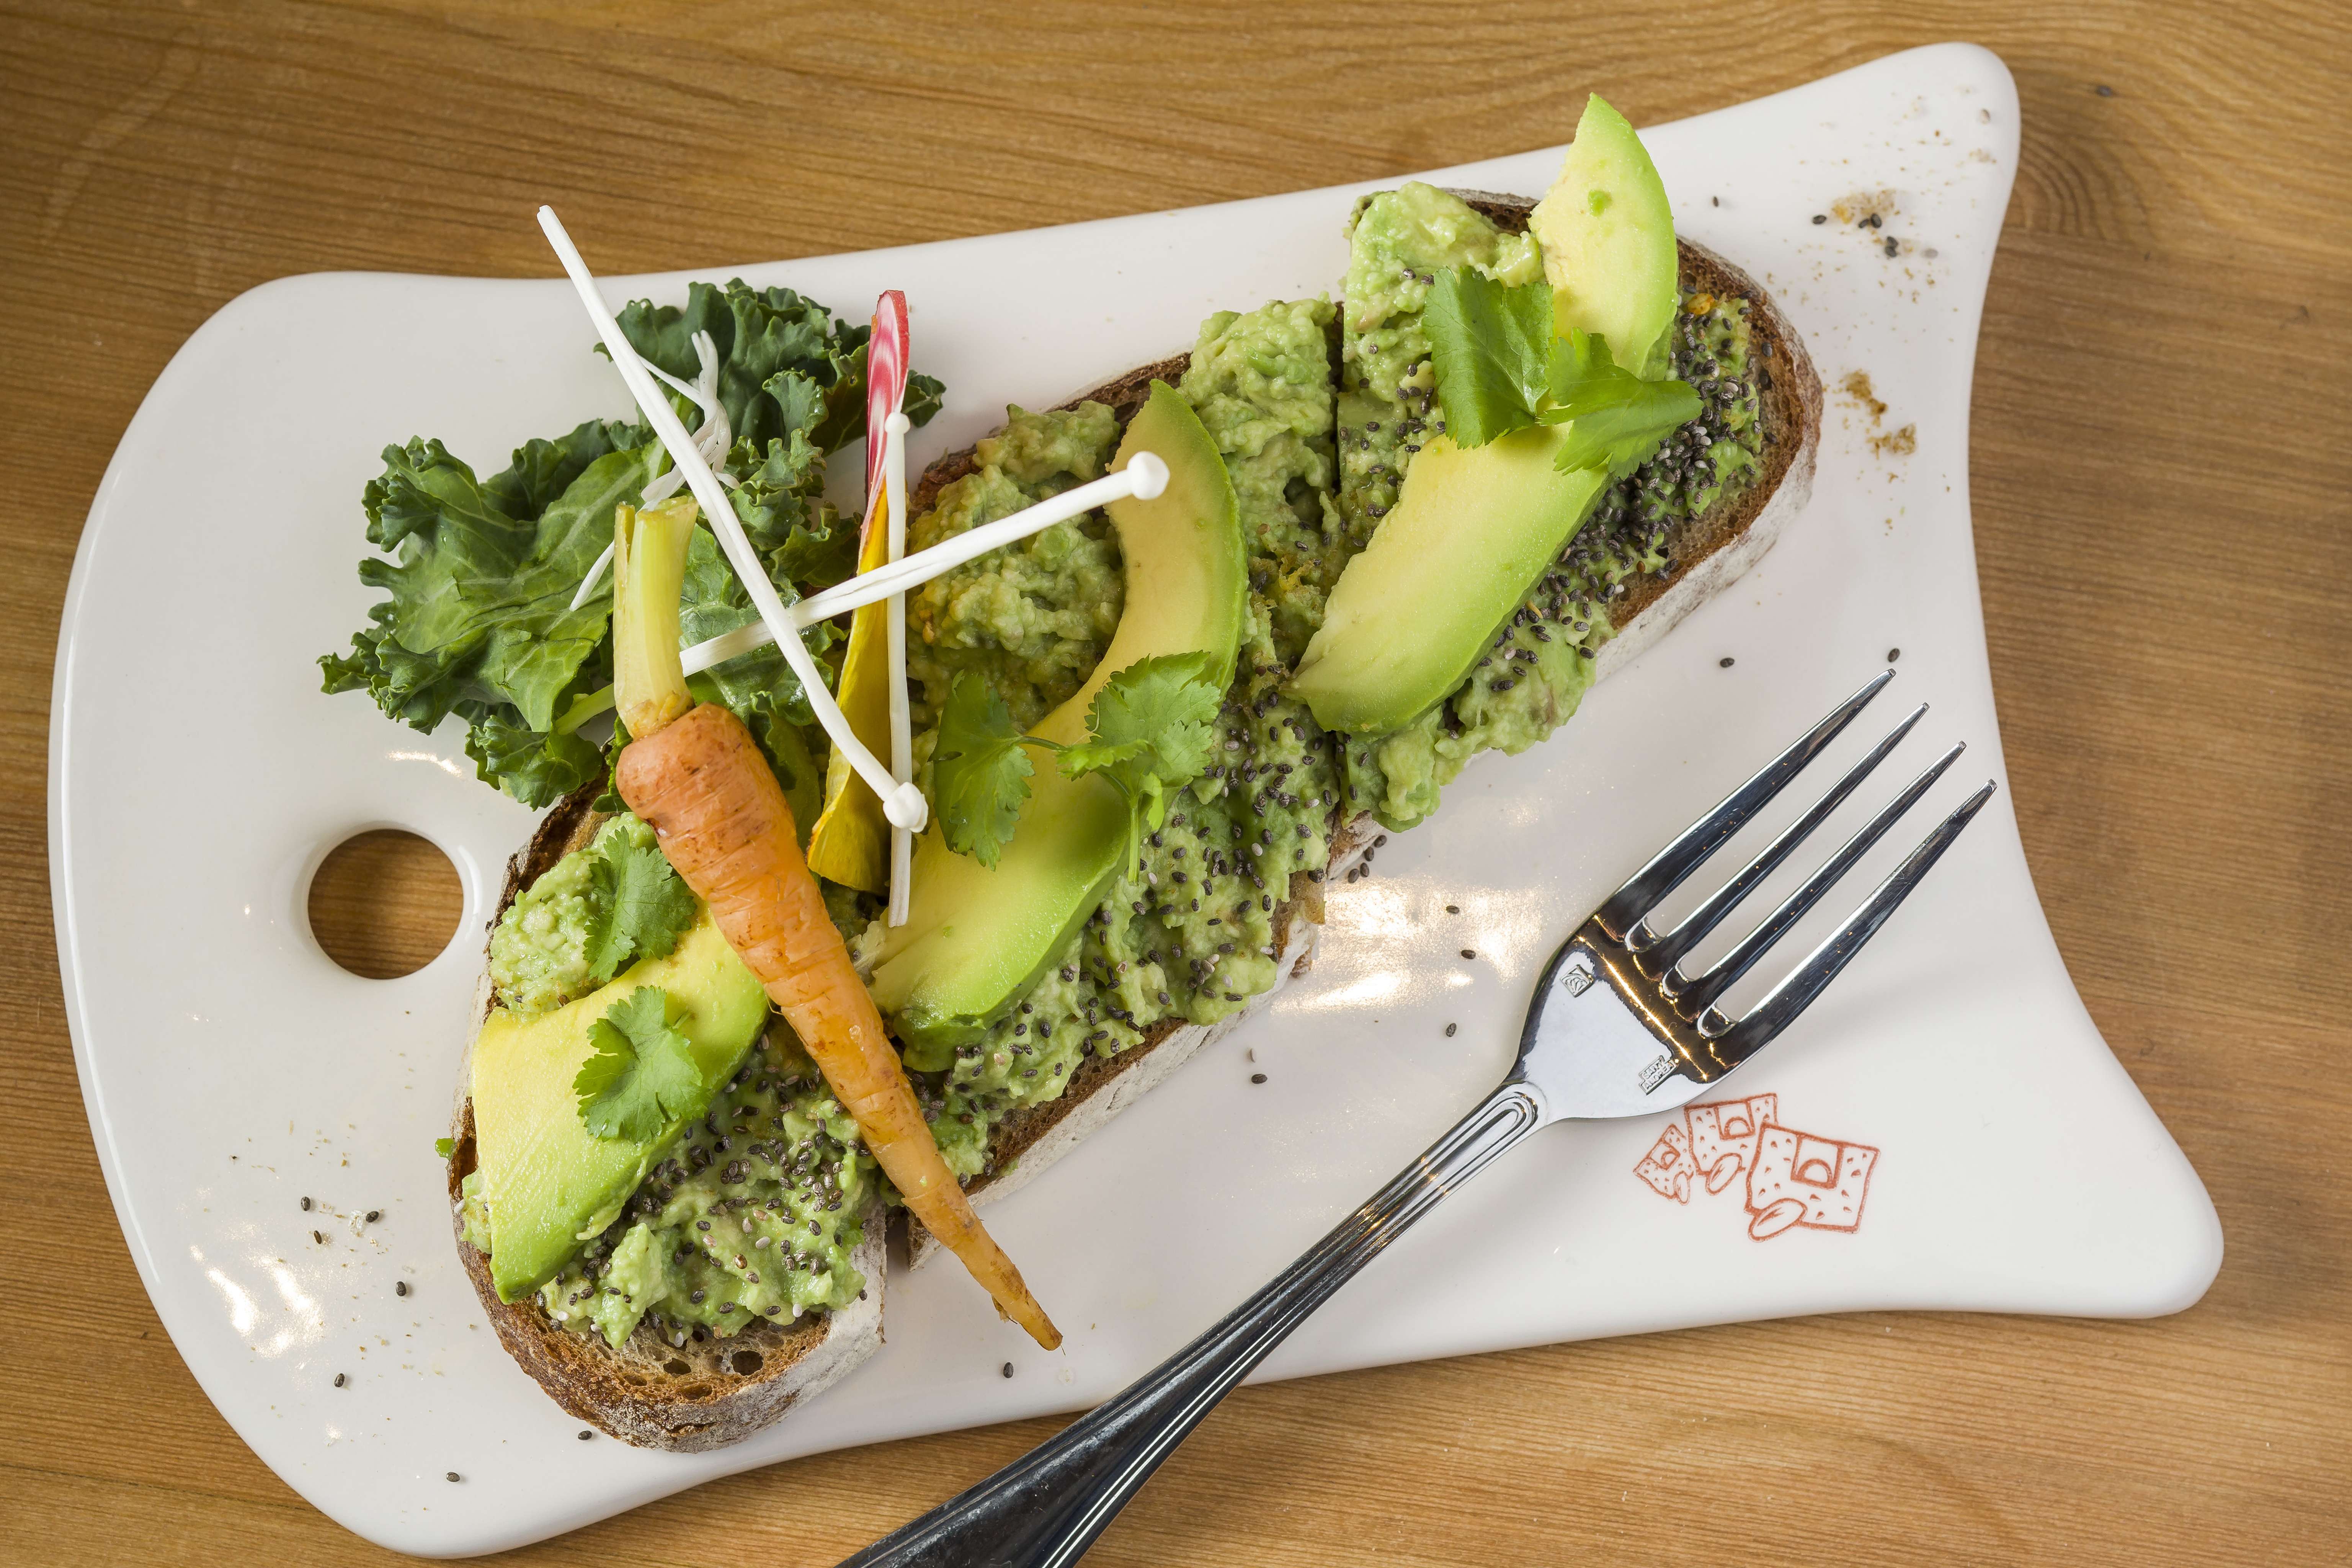 An Australian economist has created a storm by suggesting young people could climb on to the property ladder by saving on luxuries such as avocado on toast. File photo